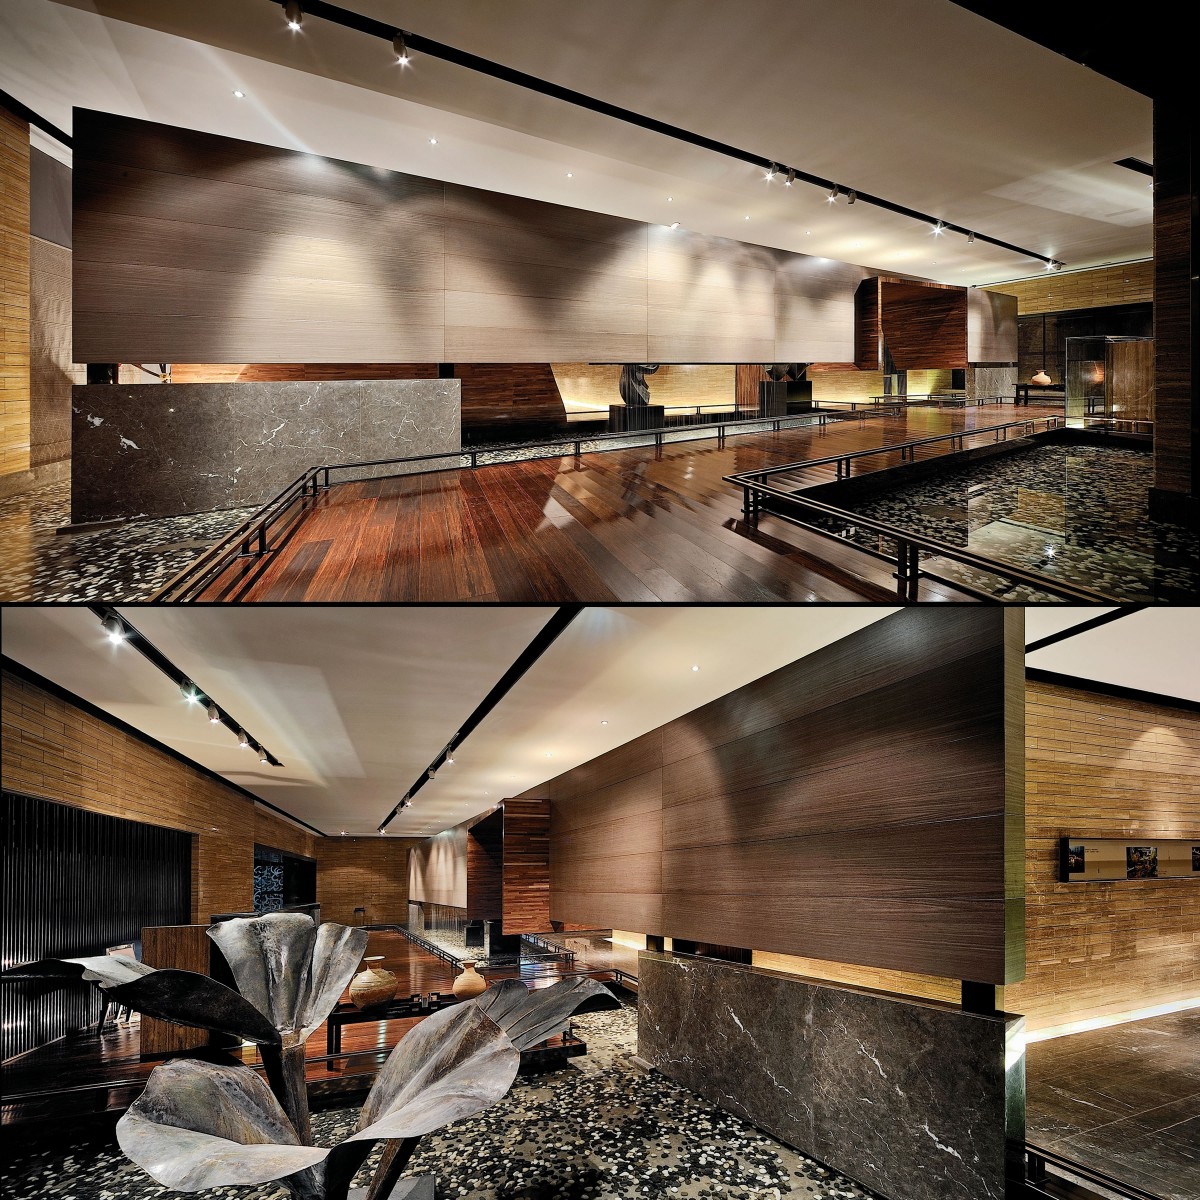 Modern Chinese Garden Real Estate Agency by Kris Lin Bronze Interior Space and Exhibition Design Award Winner 2012 